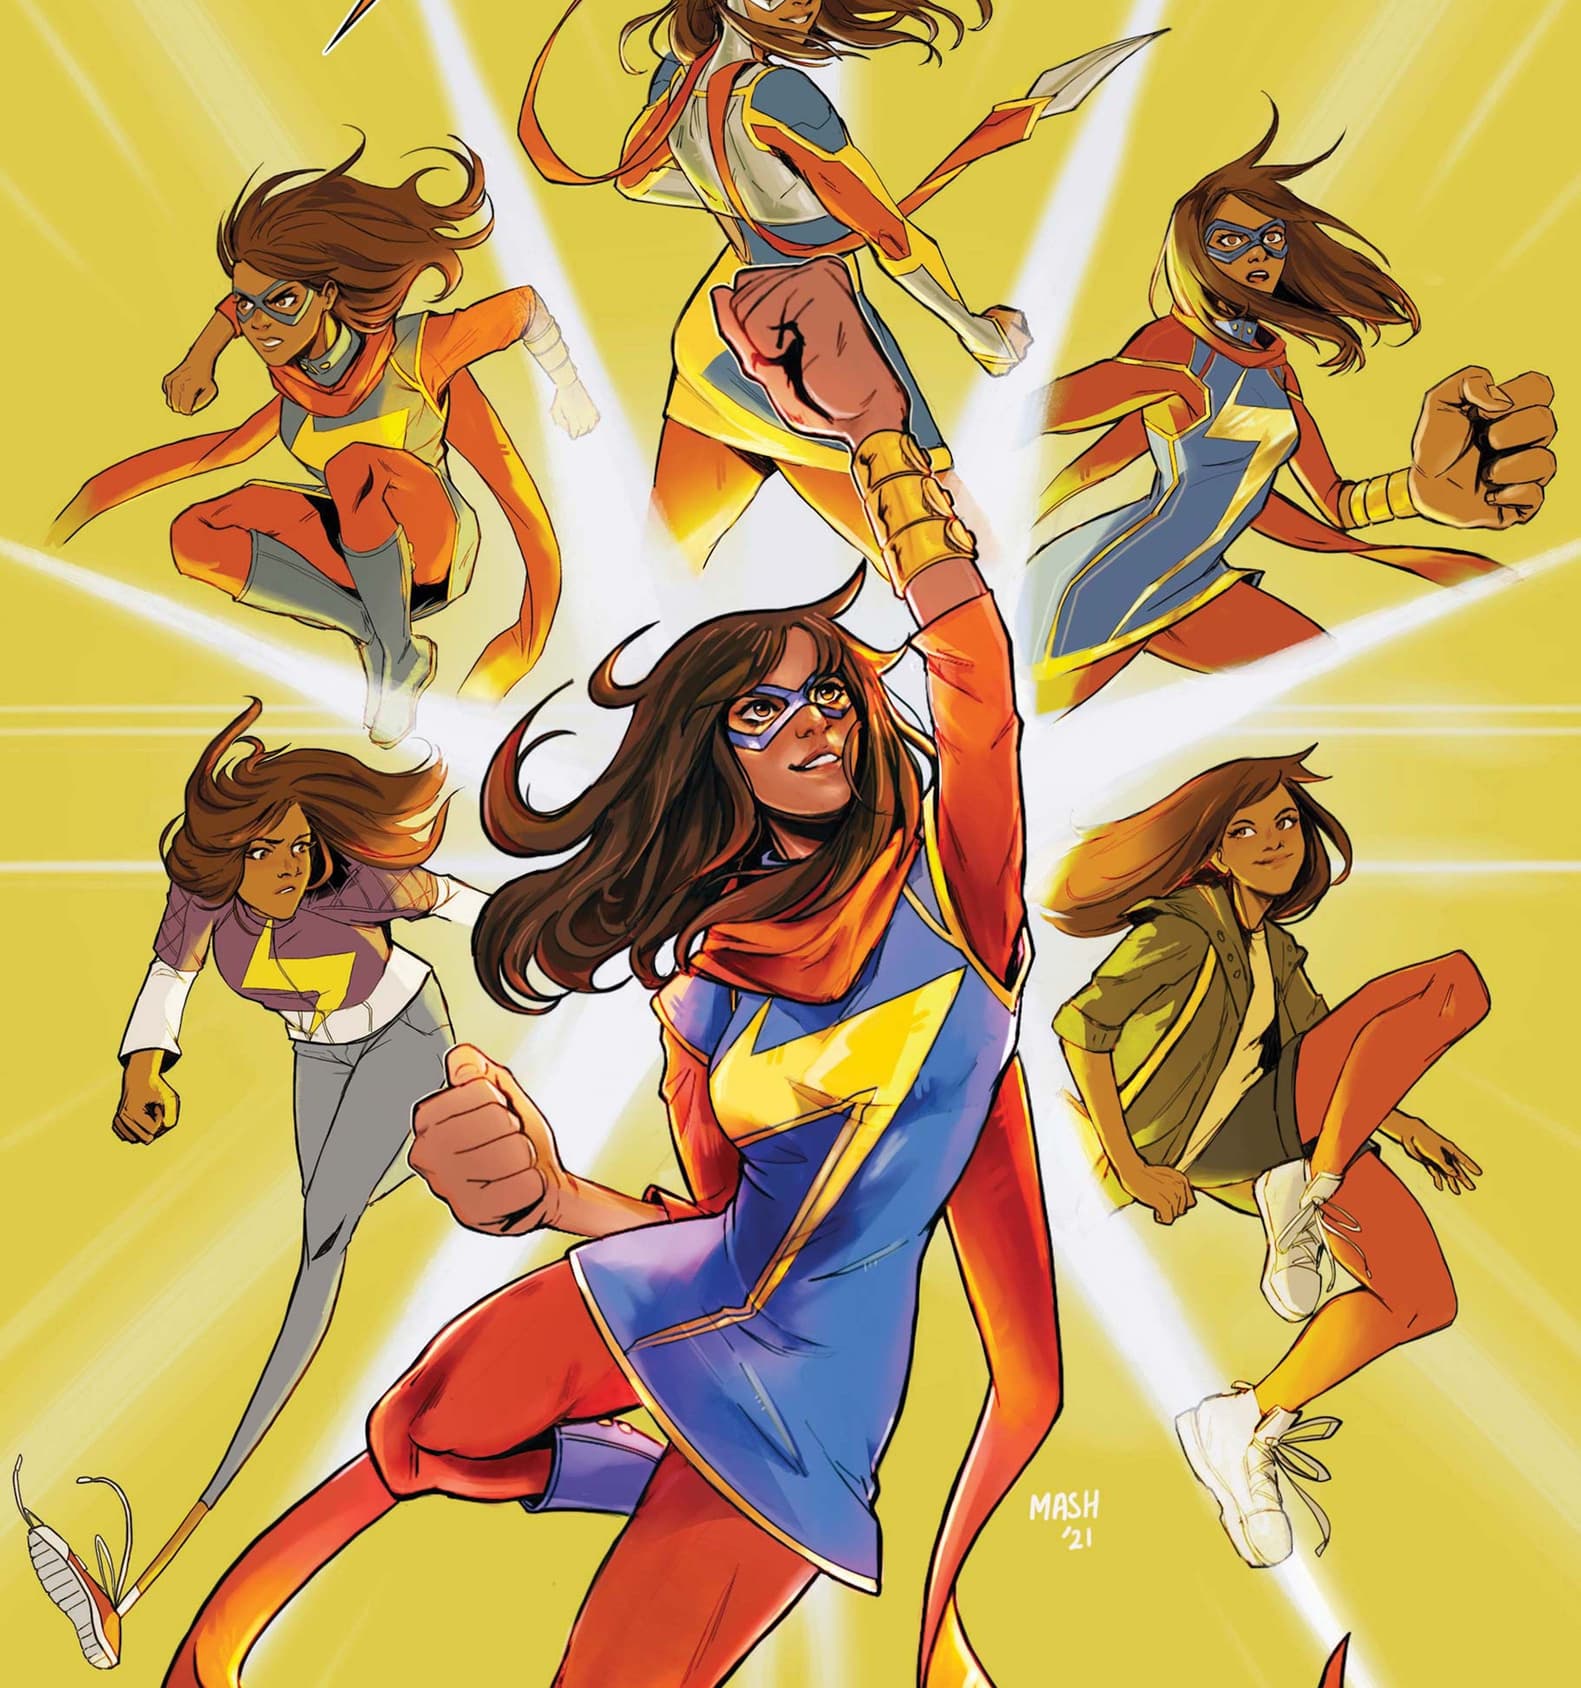 MS. MARVEL: BEYOND THE LIMIT (2021) #1 cover by Mashal Ahmed